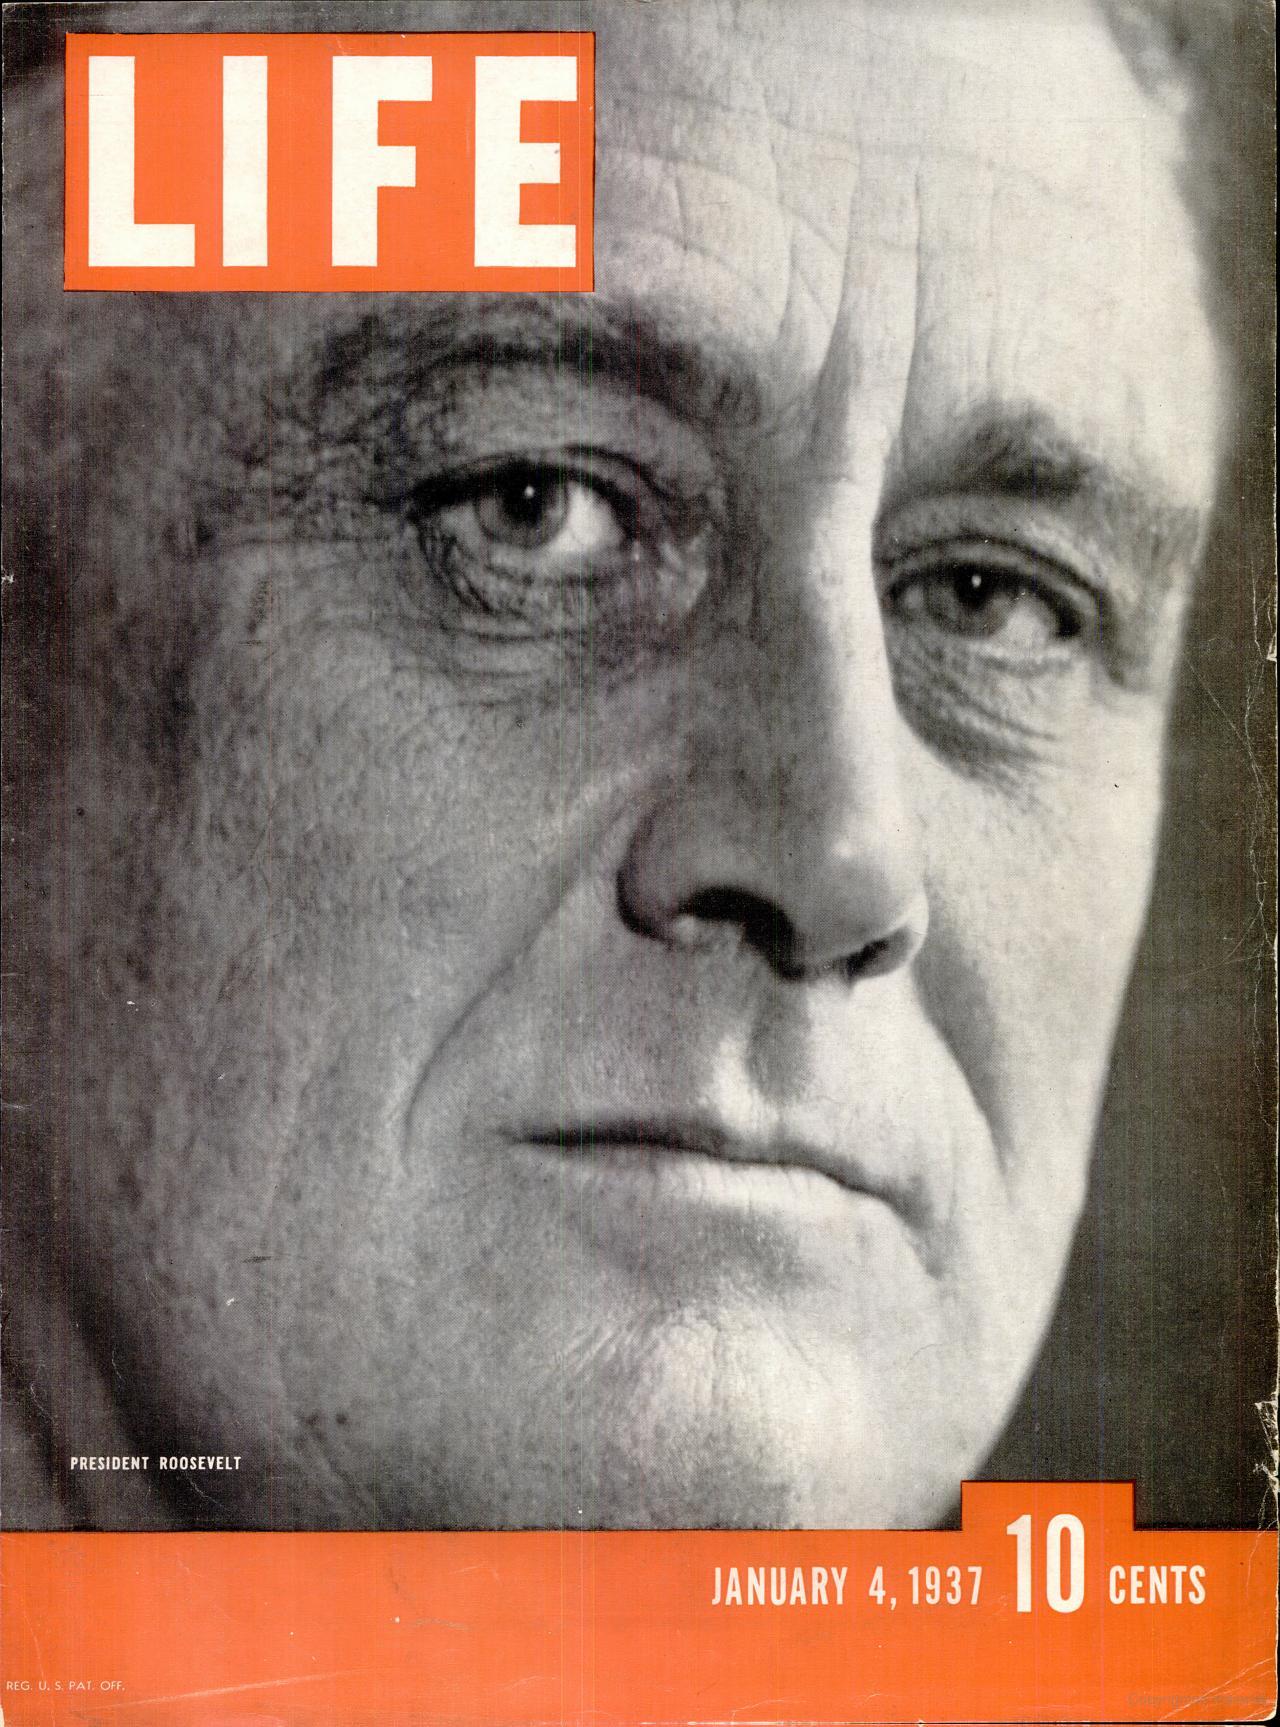 LIFE cover 4 Jan 1937